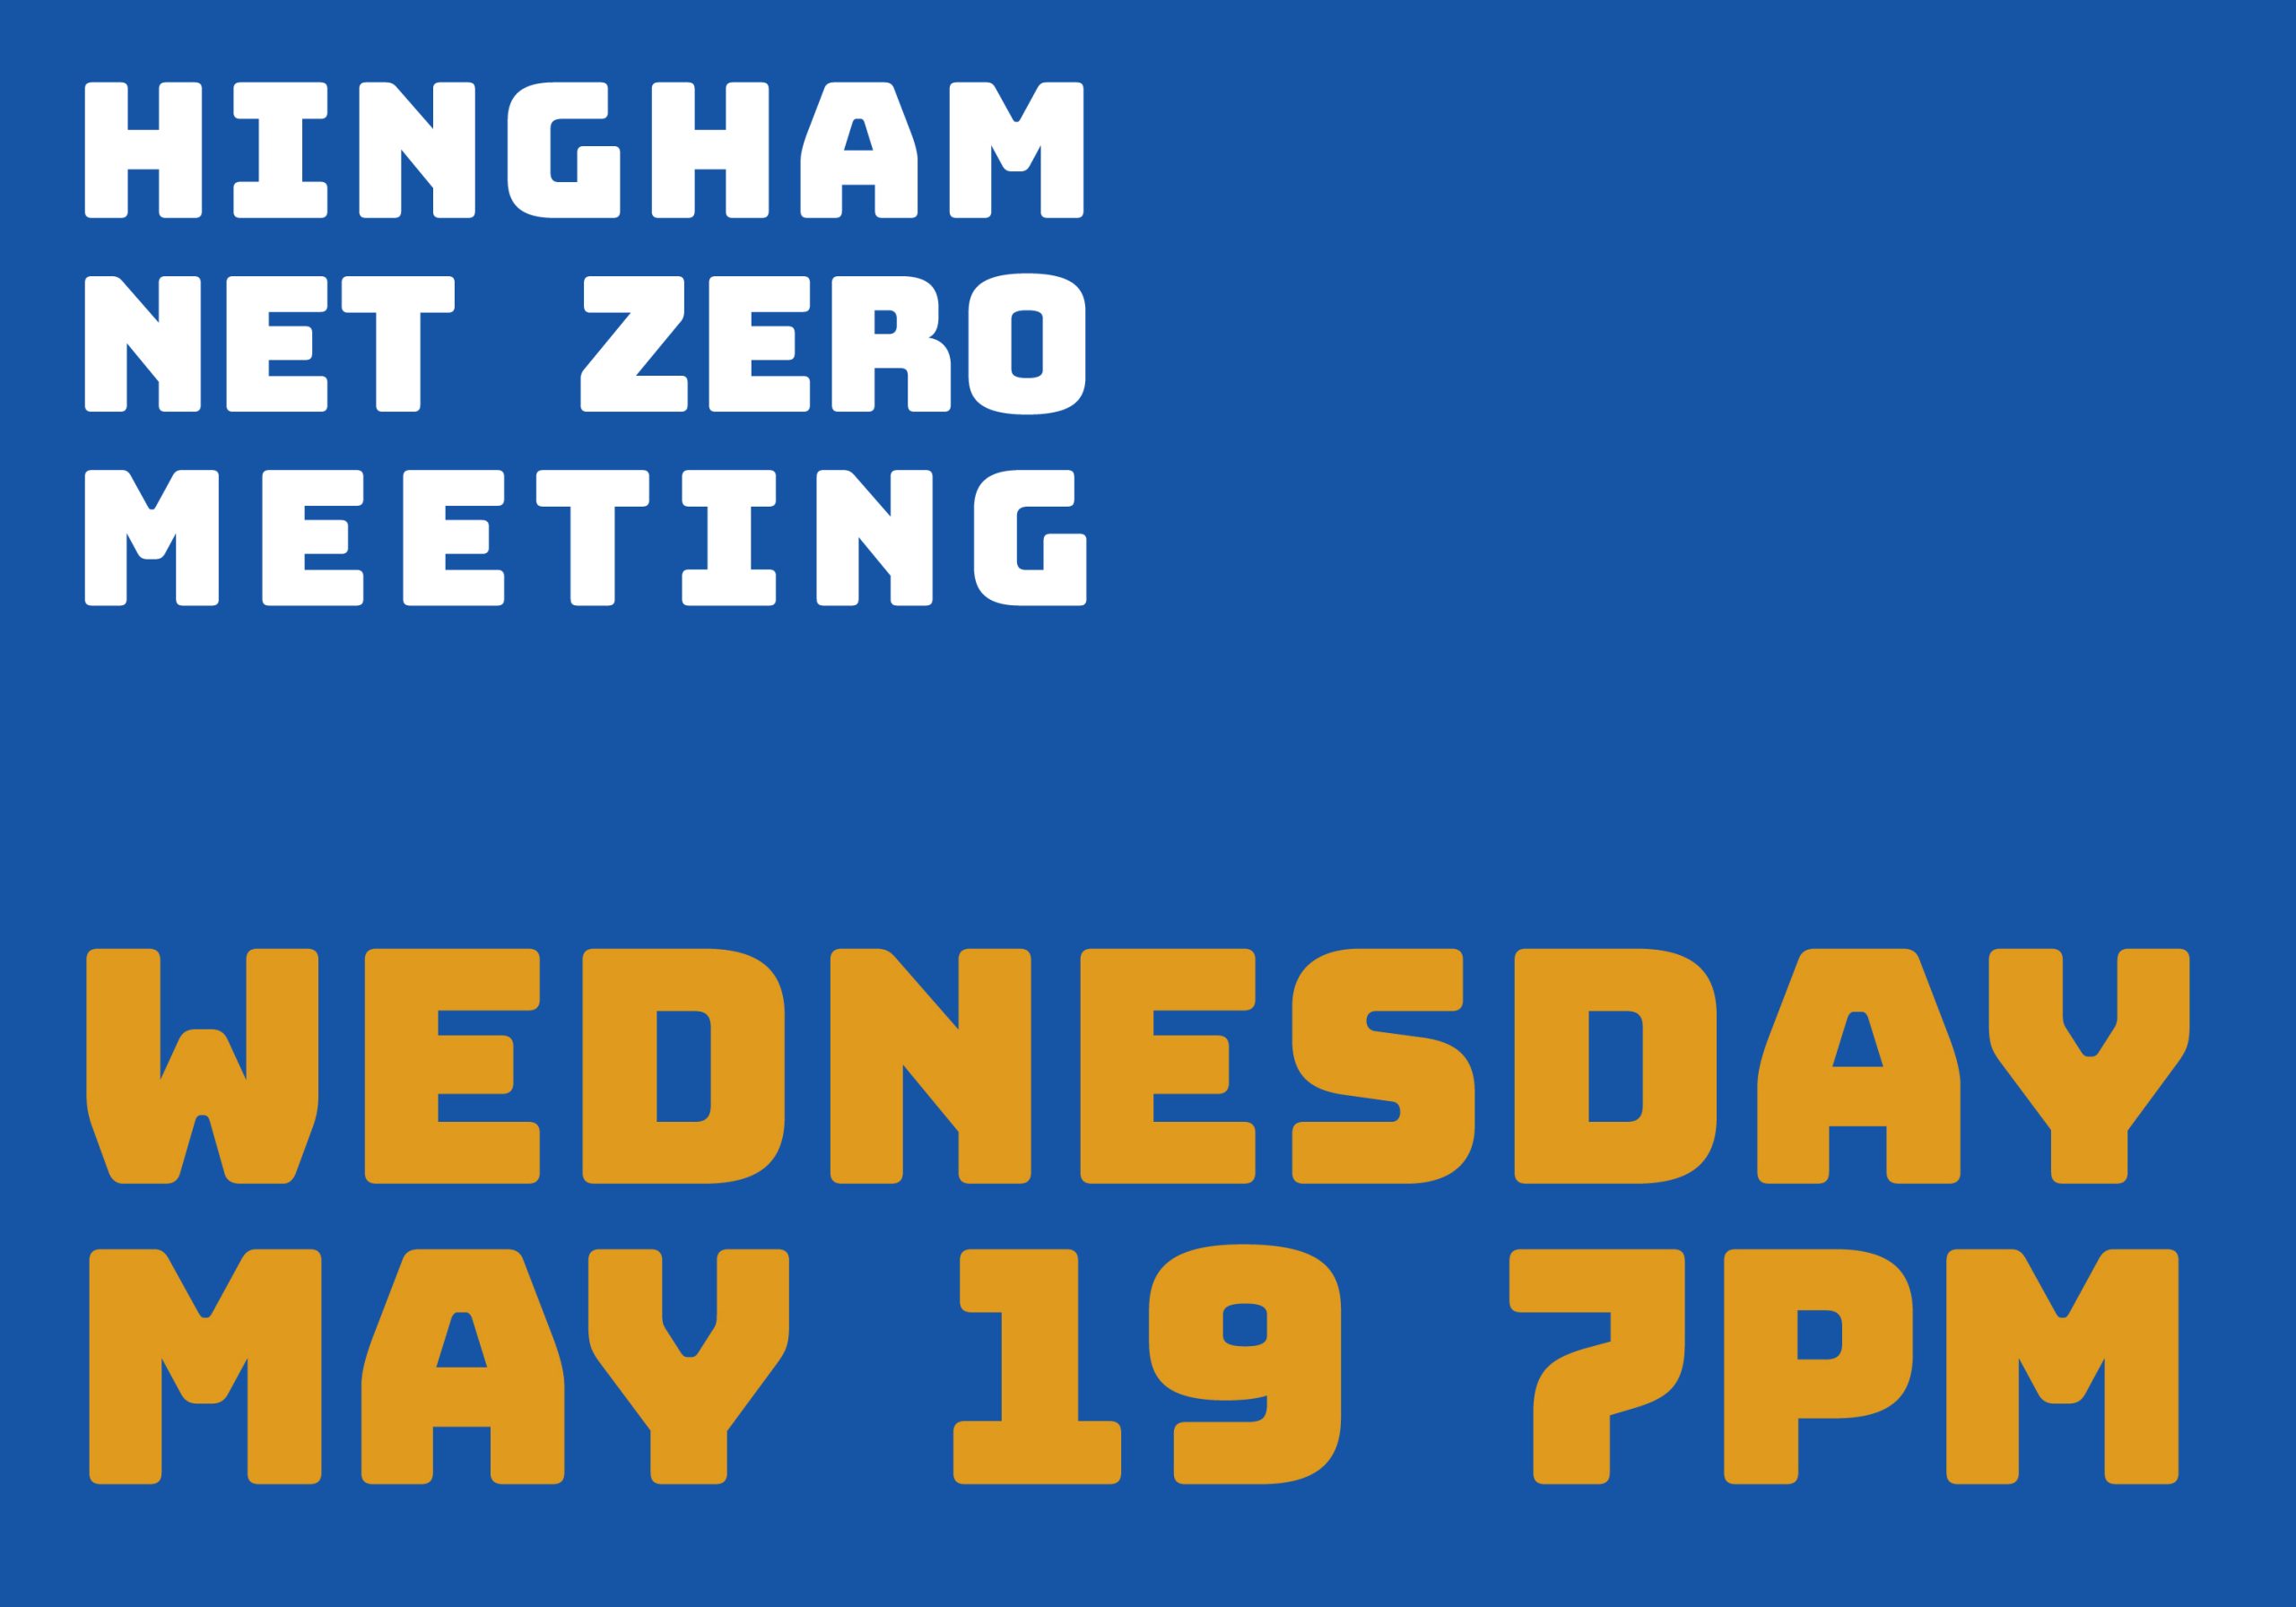 HNZ Meeting Wednesday May 19 at 7pm